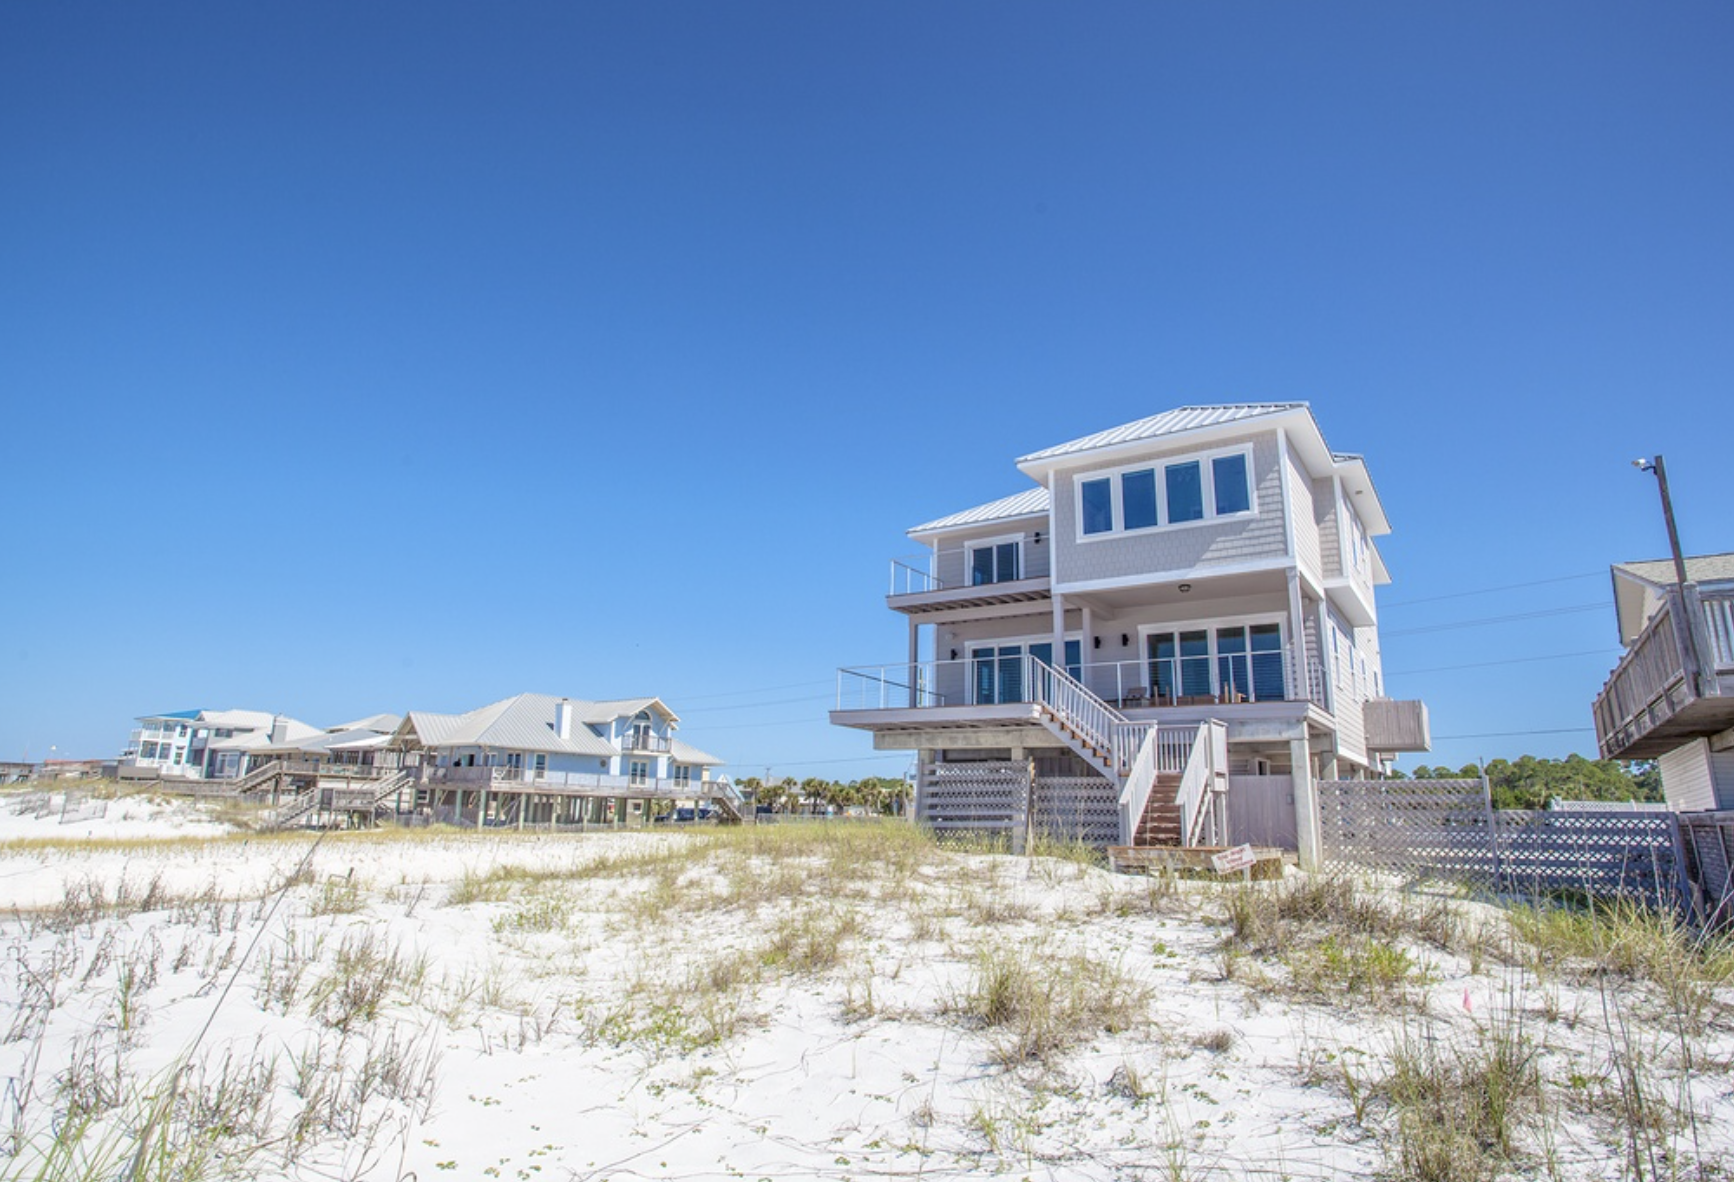 30A Peace of Paradise - exterior of beach rental home